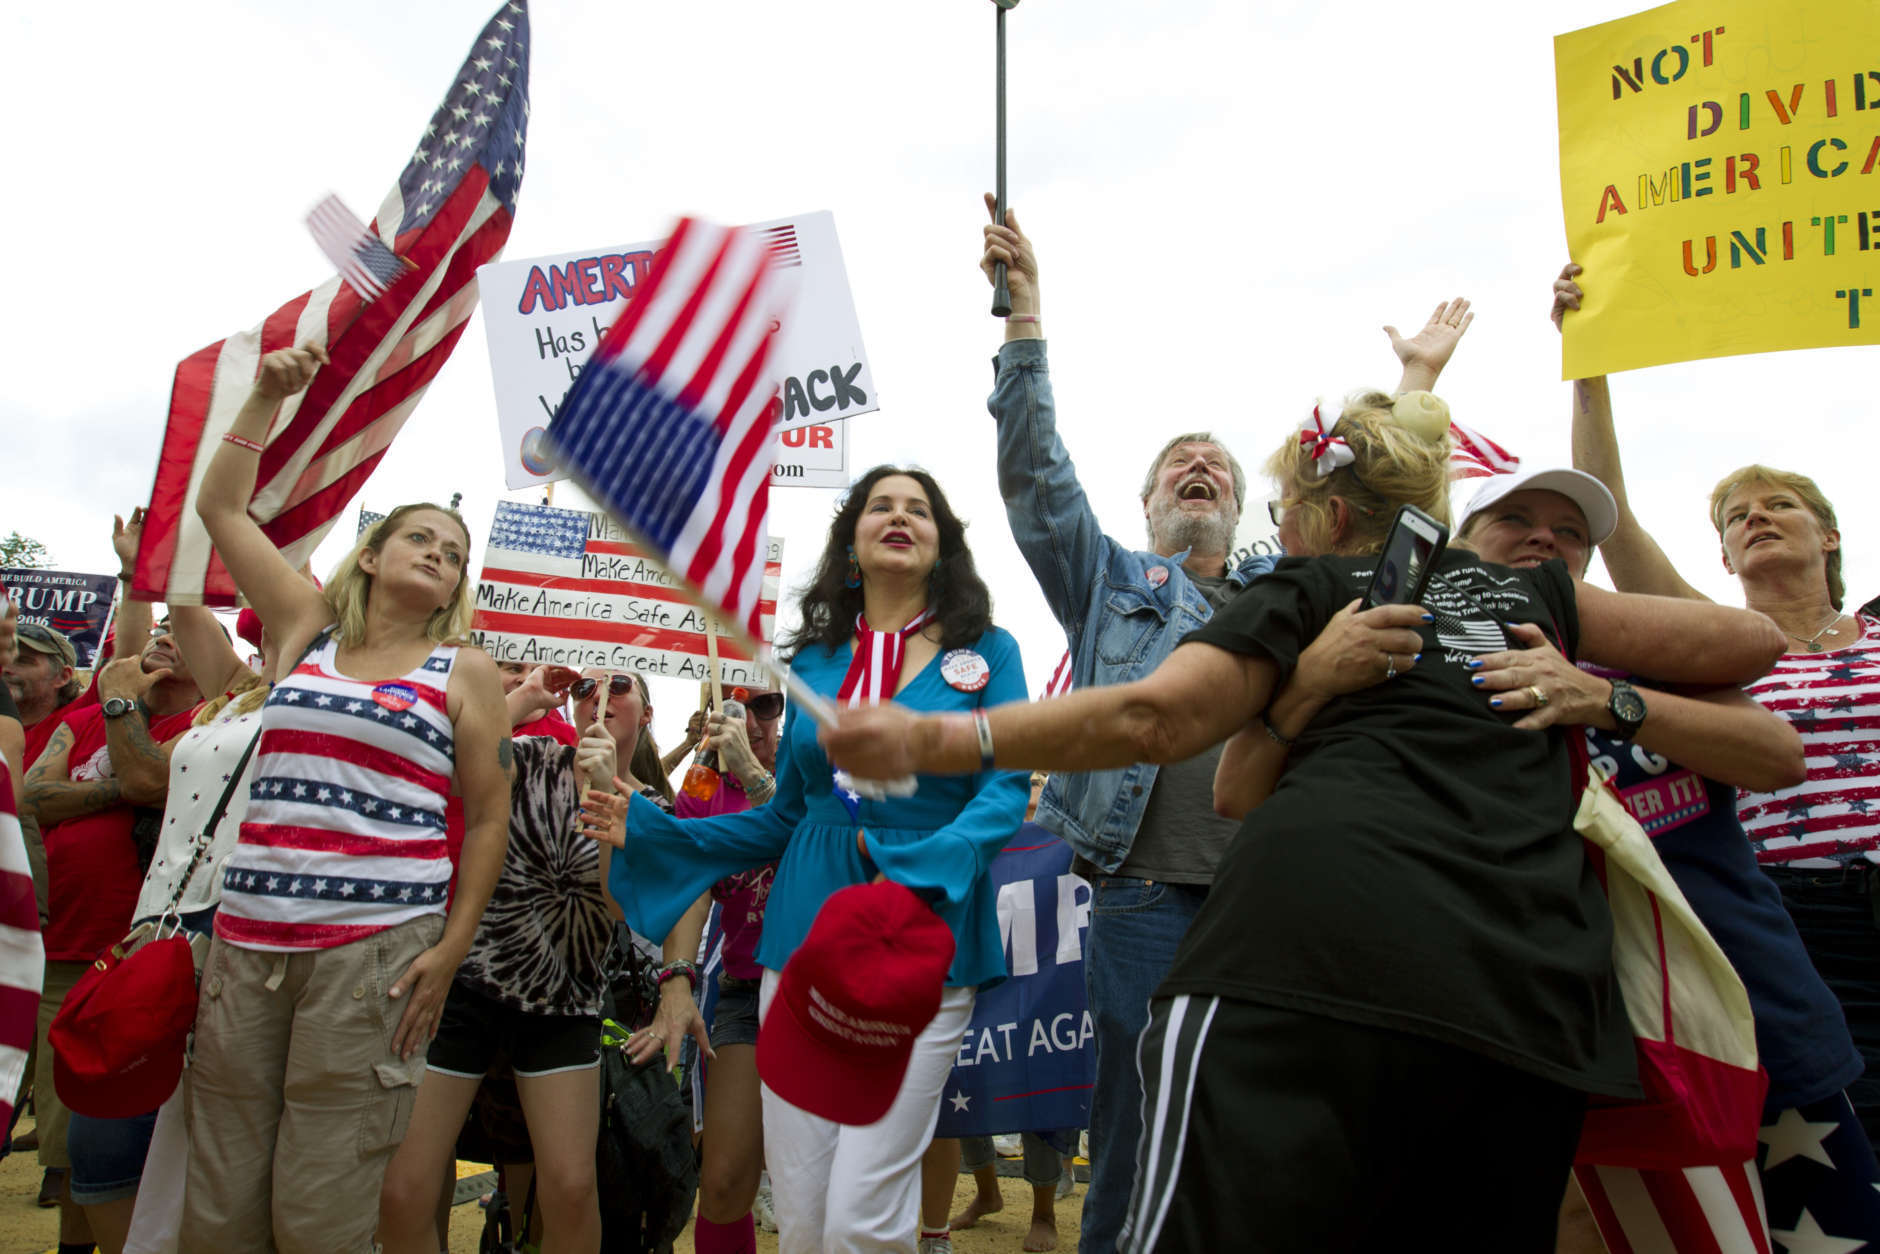 People gather on the National Mall in Washington, Saturday, Sept. 16, 2017, to attend a rally in support of President Donald Trump in what organizers are calling 'The Mother of All Rallies." ( AP Photo/Jose Luis Magana)